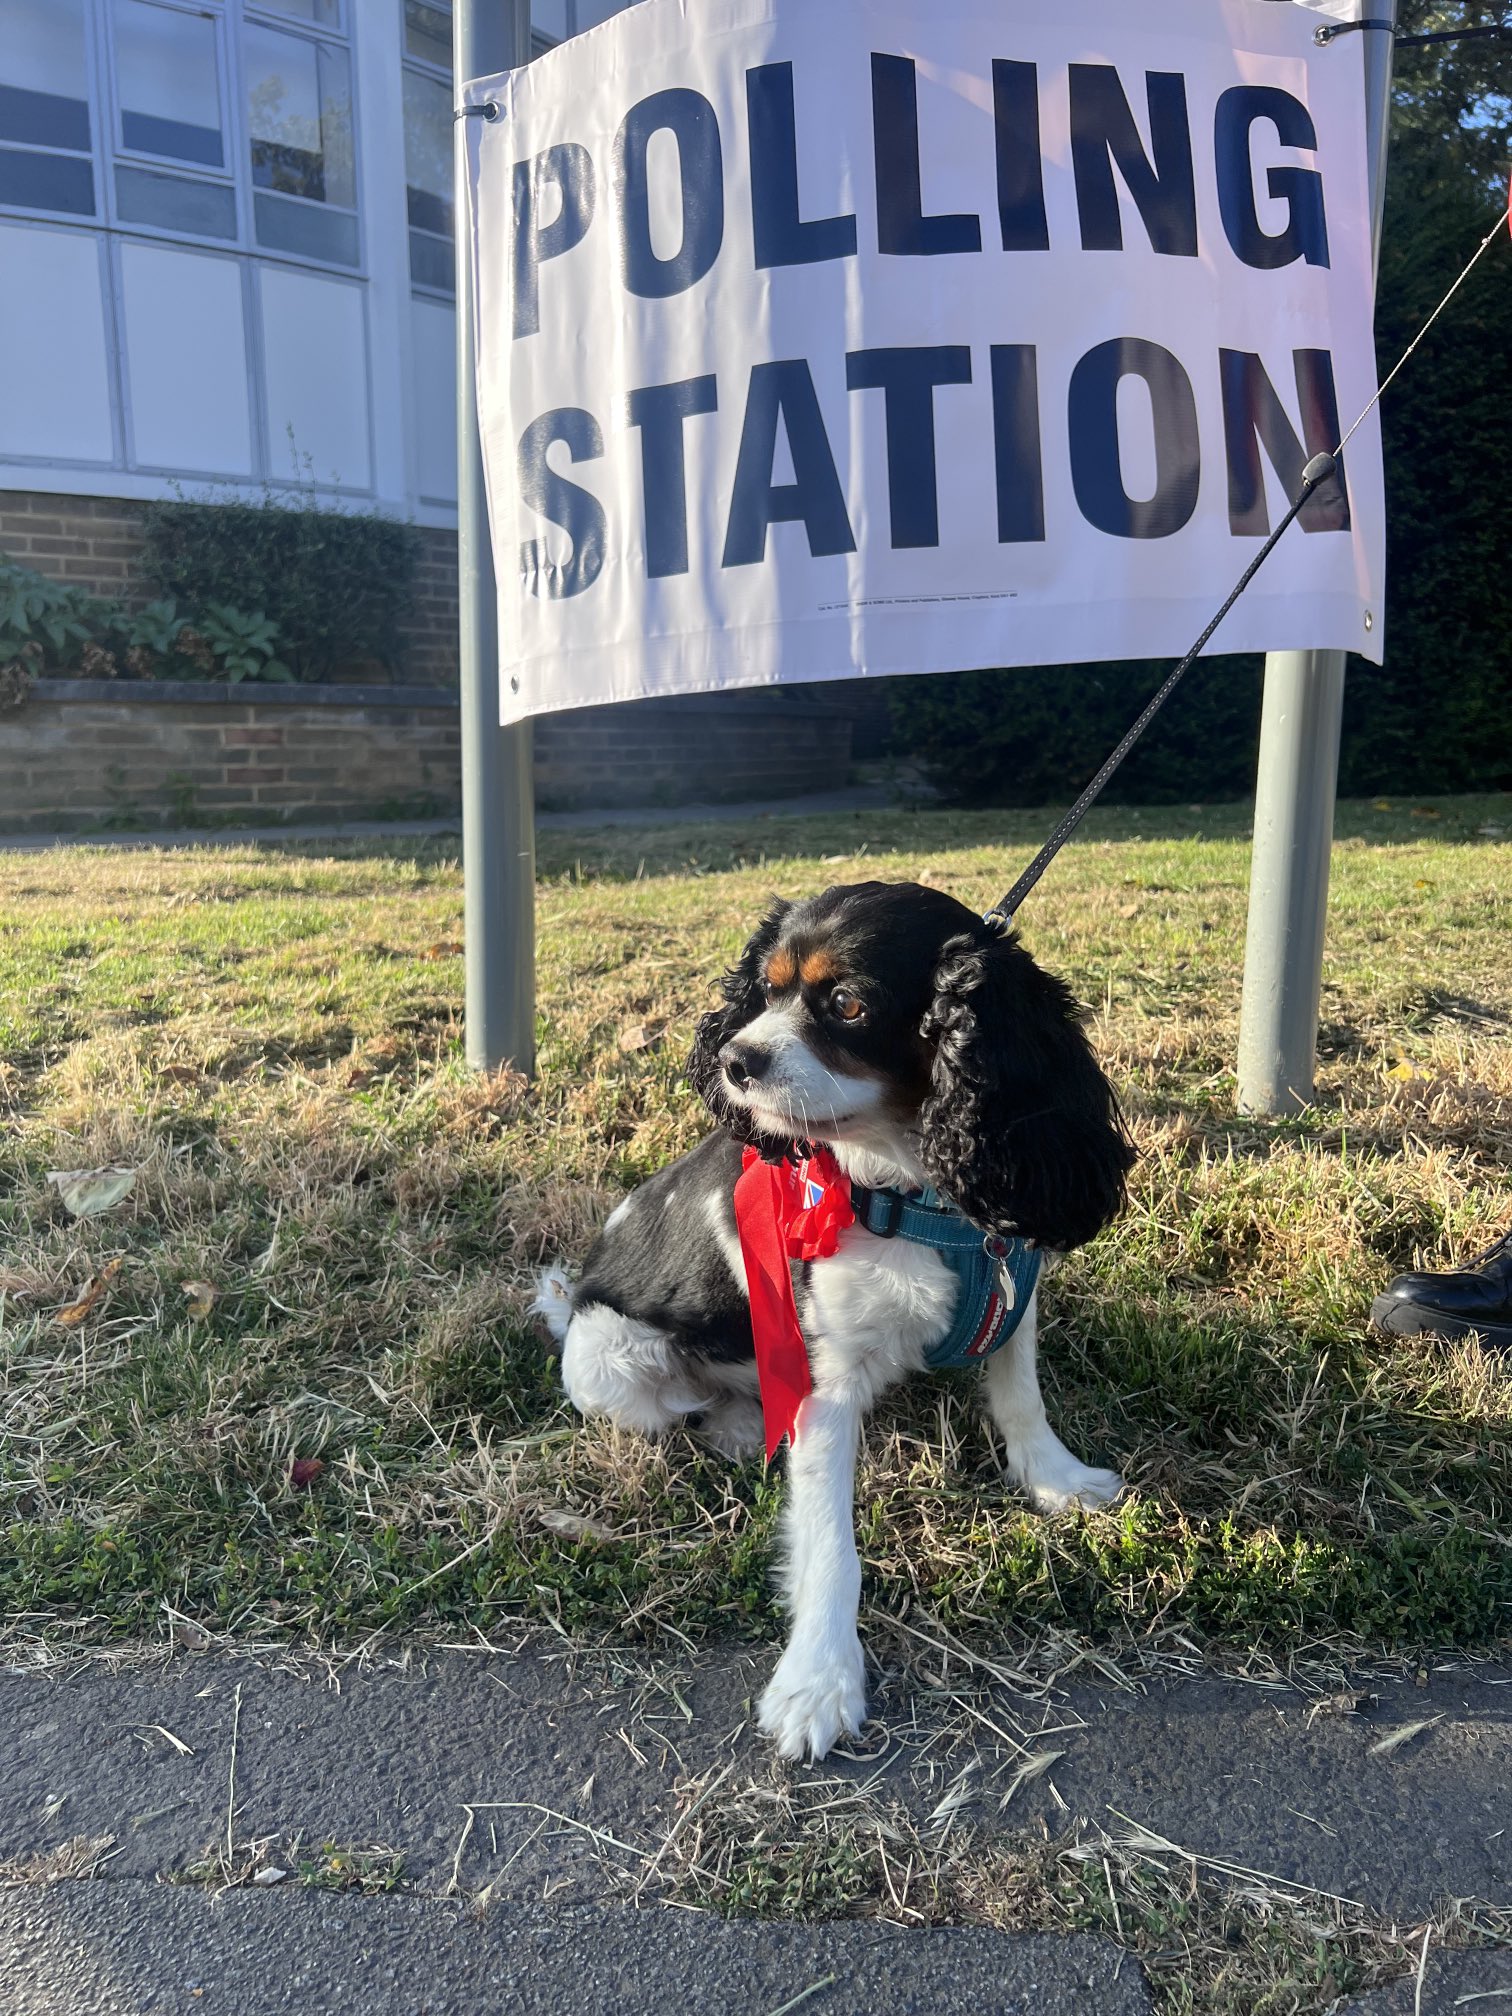 Dog in front of polling station sign